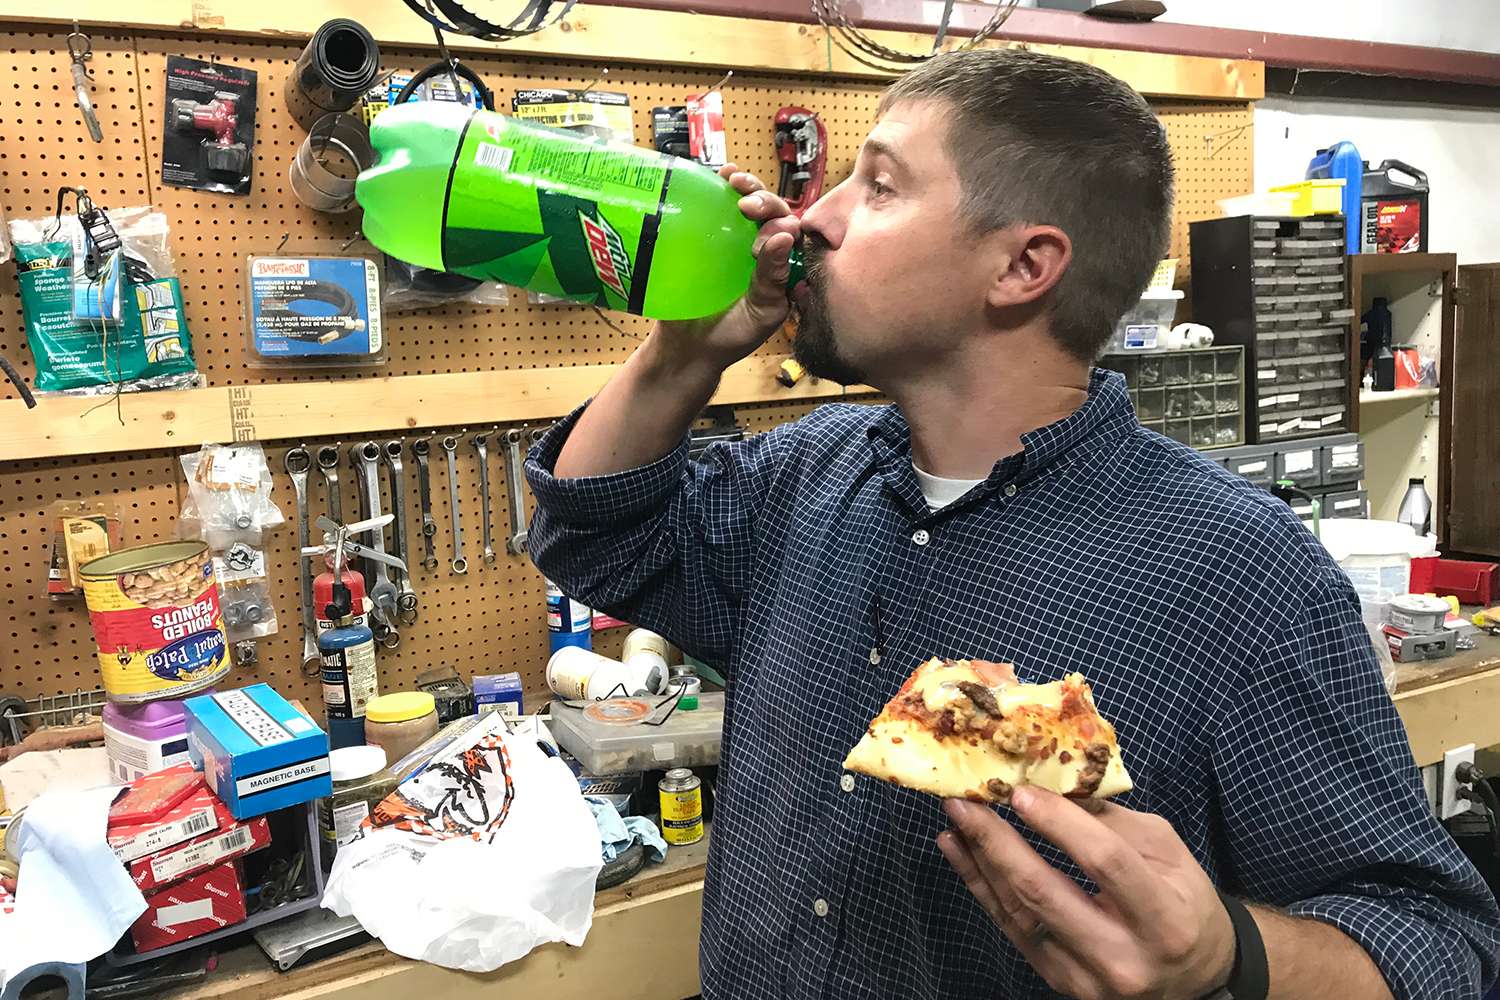 Paul decides to power up on a 2-litre of Mt. Dew. This man is for real, folks. He doesn't mess around when it comes to detailed DIY projects. Every piston needs fuel. 